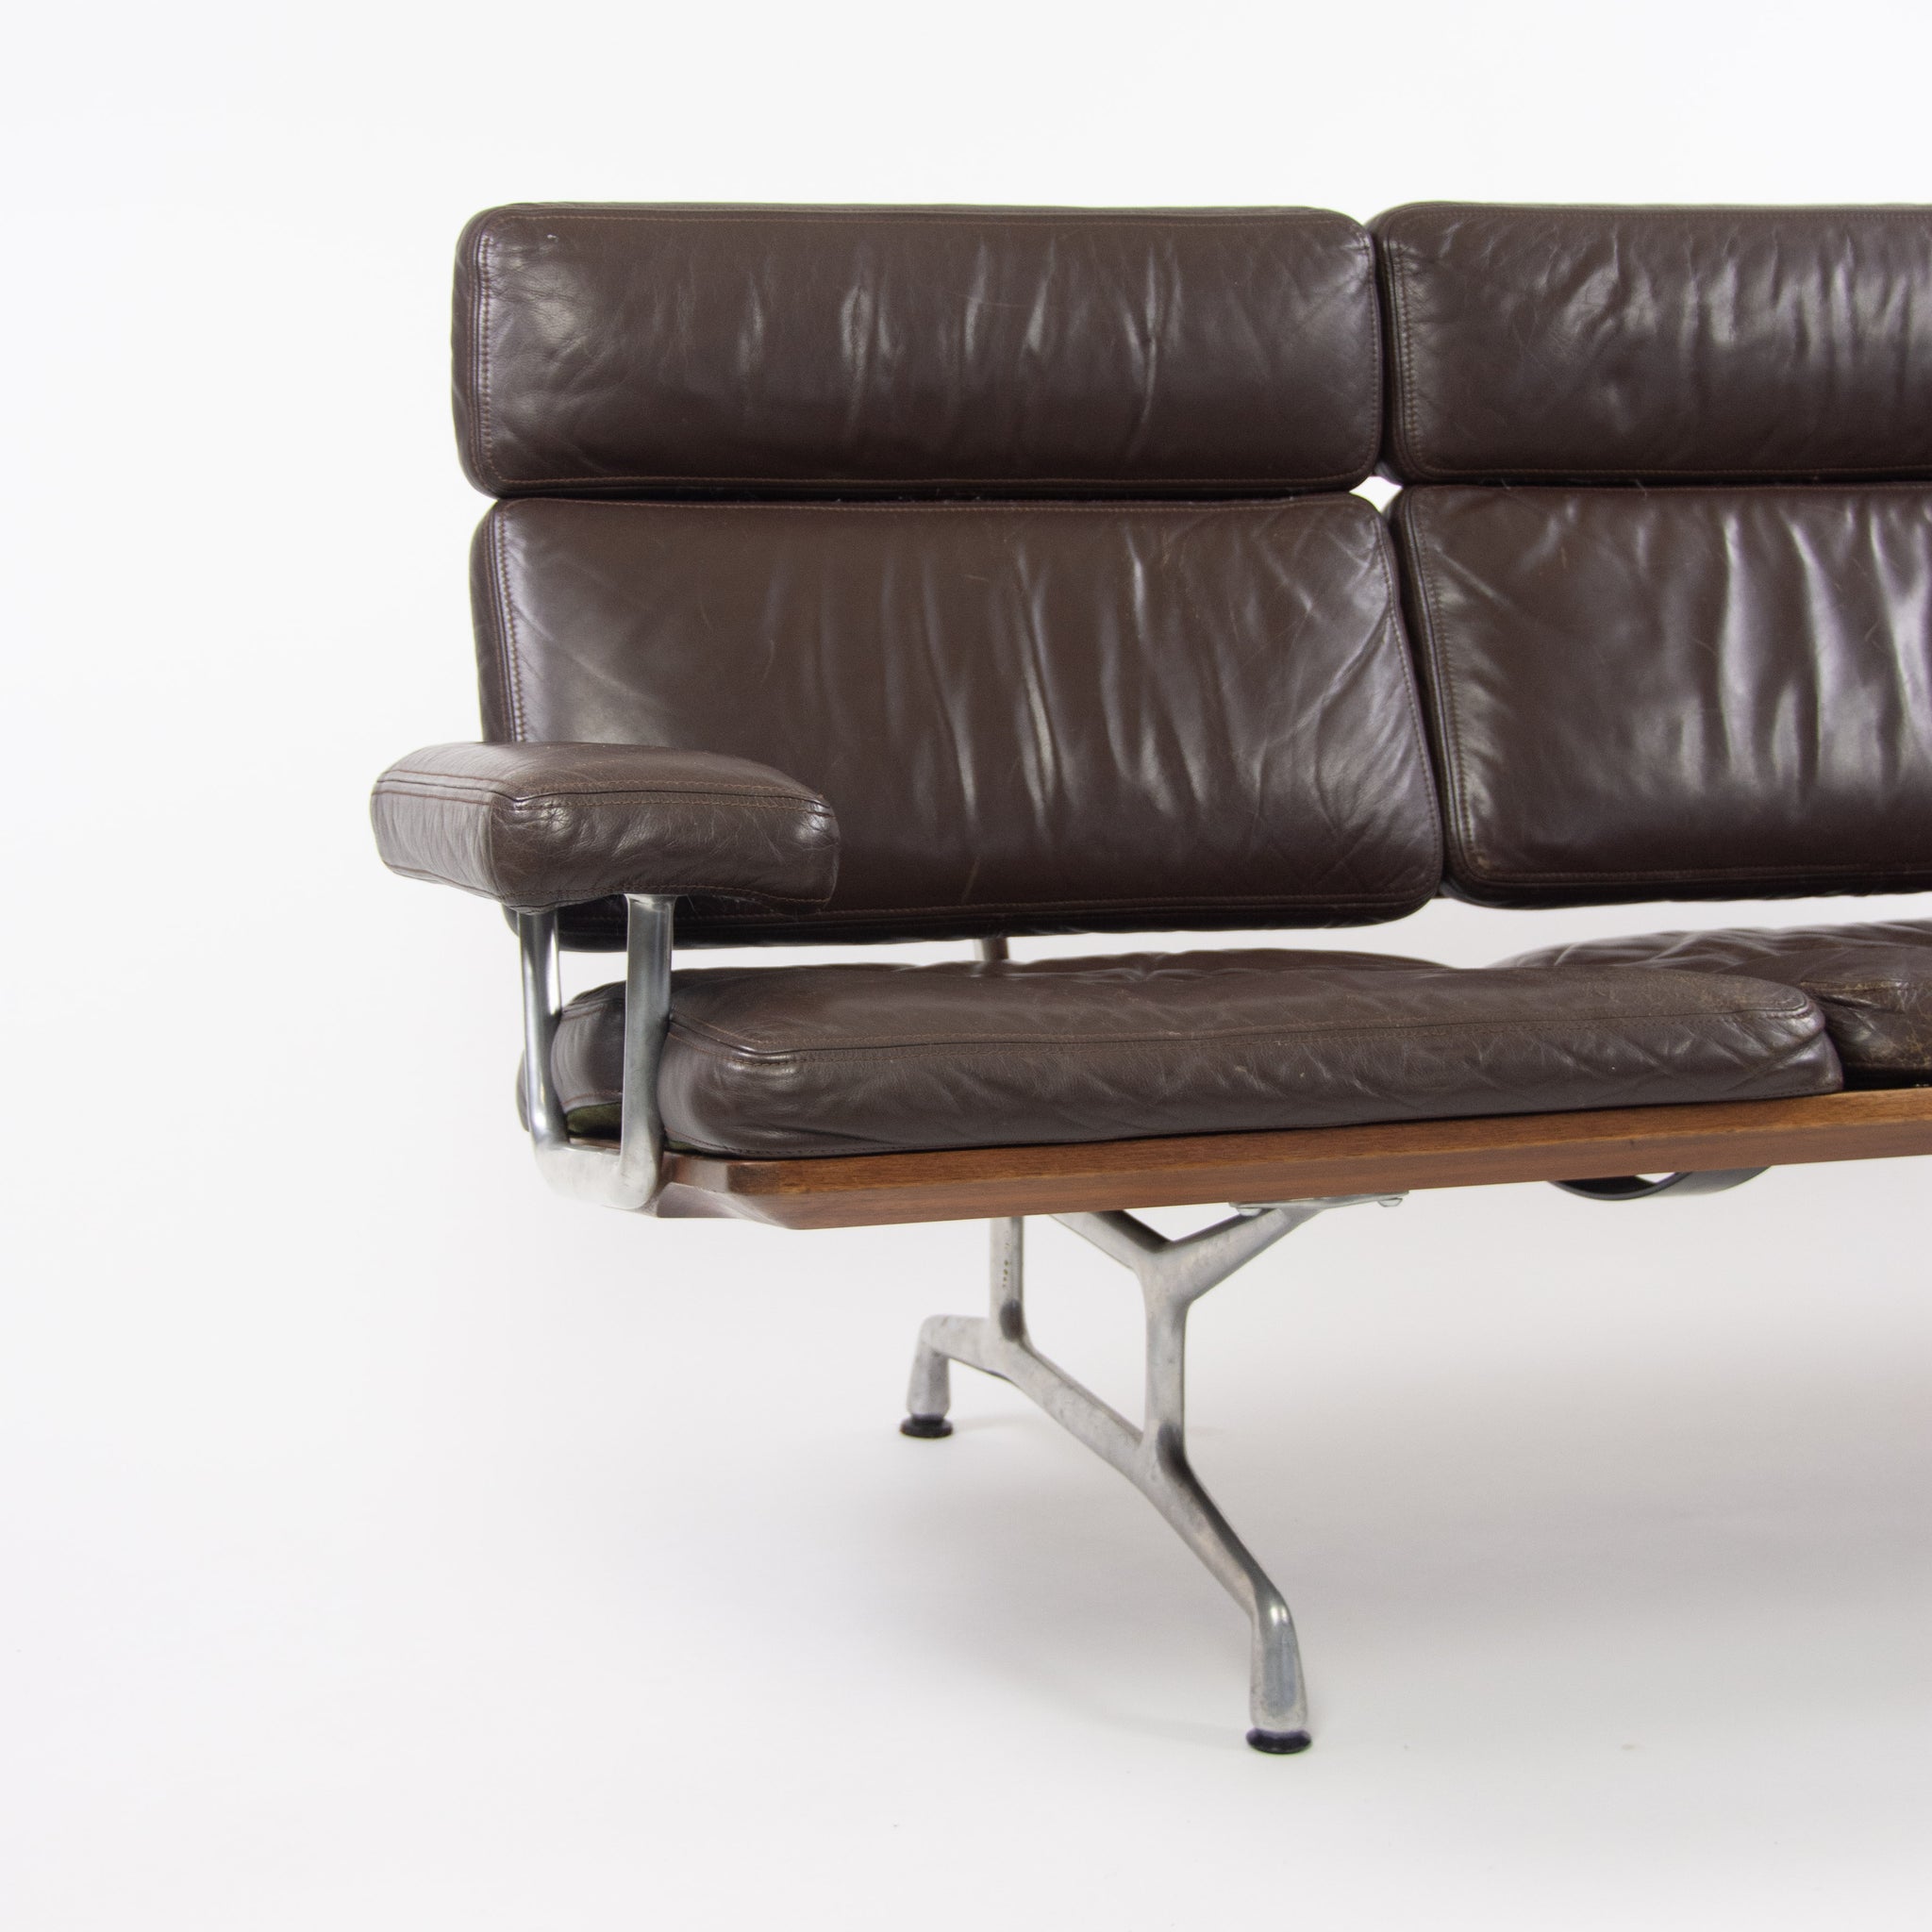 SOLD 1980s Vintage Eames Herman Miller Three Seater Sofa Walnut and Brown Leather #1